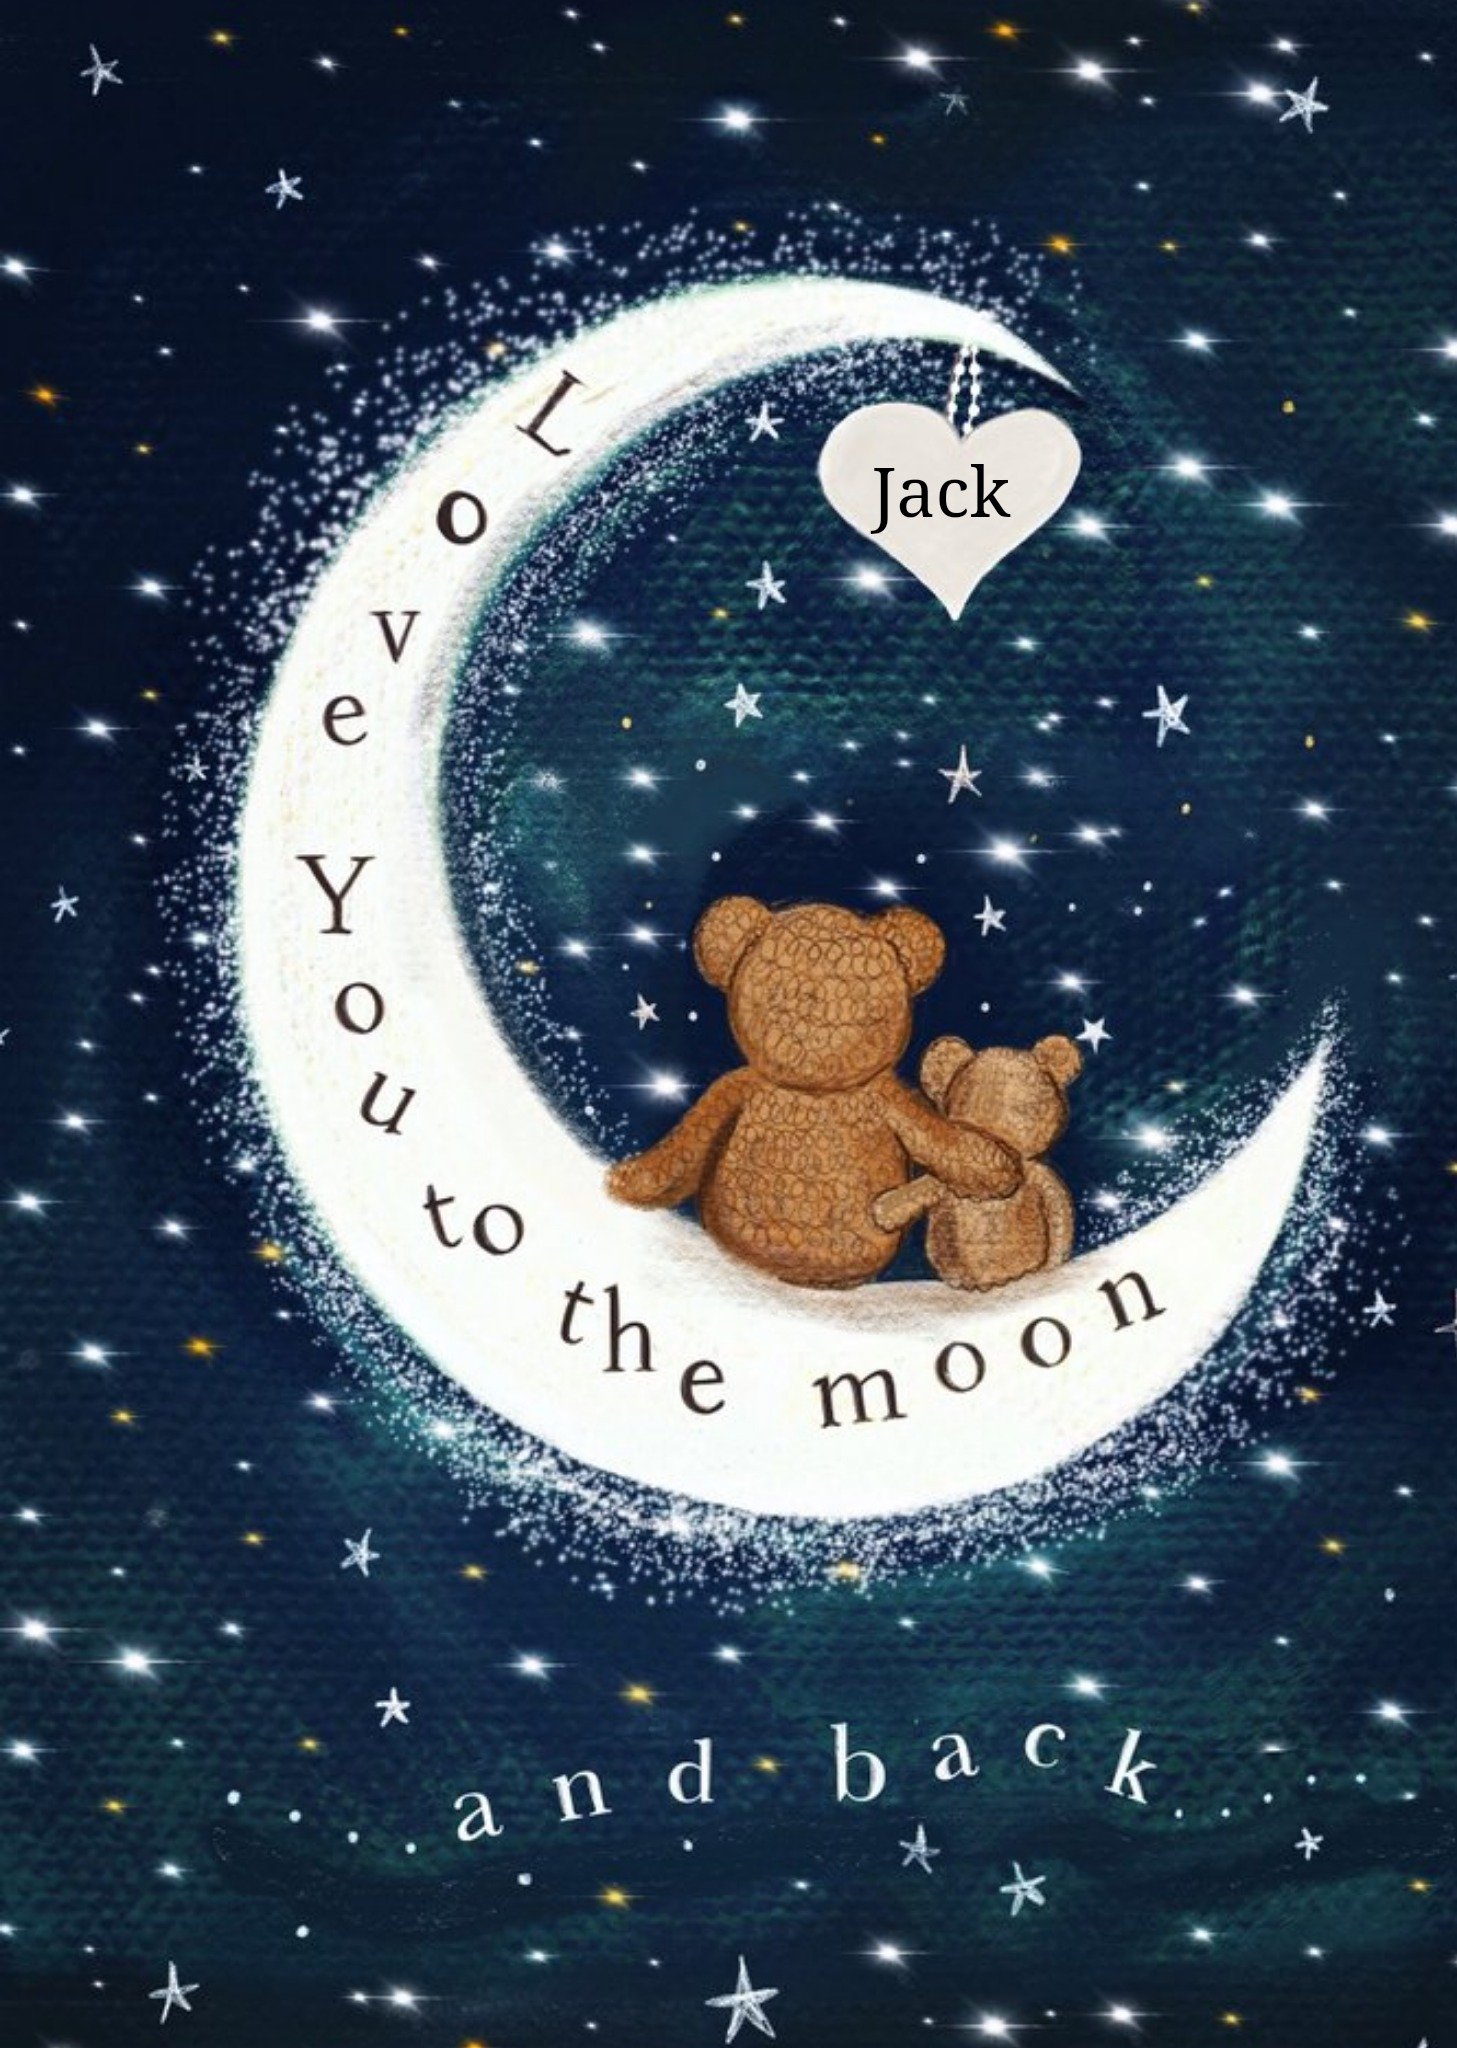 Moonpig Illustration Of Two Bears Sitting On The Moon Surrounded By Stars Card Ecard